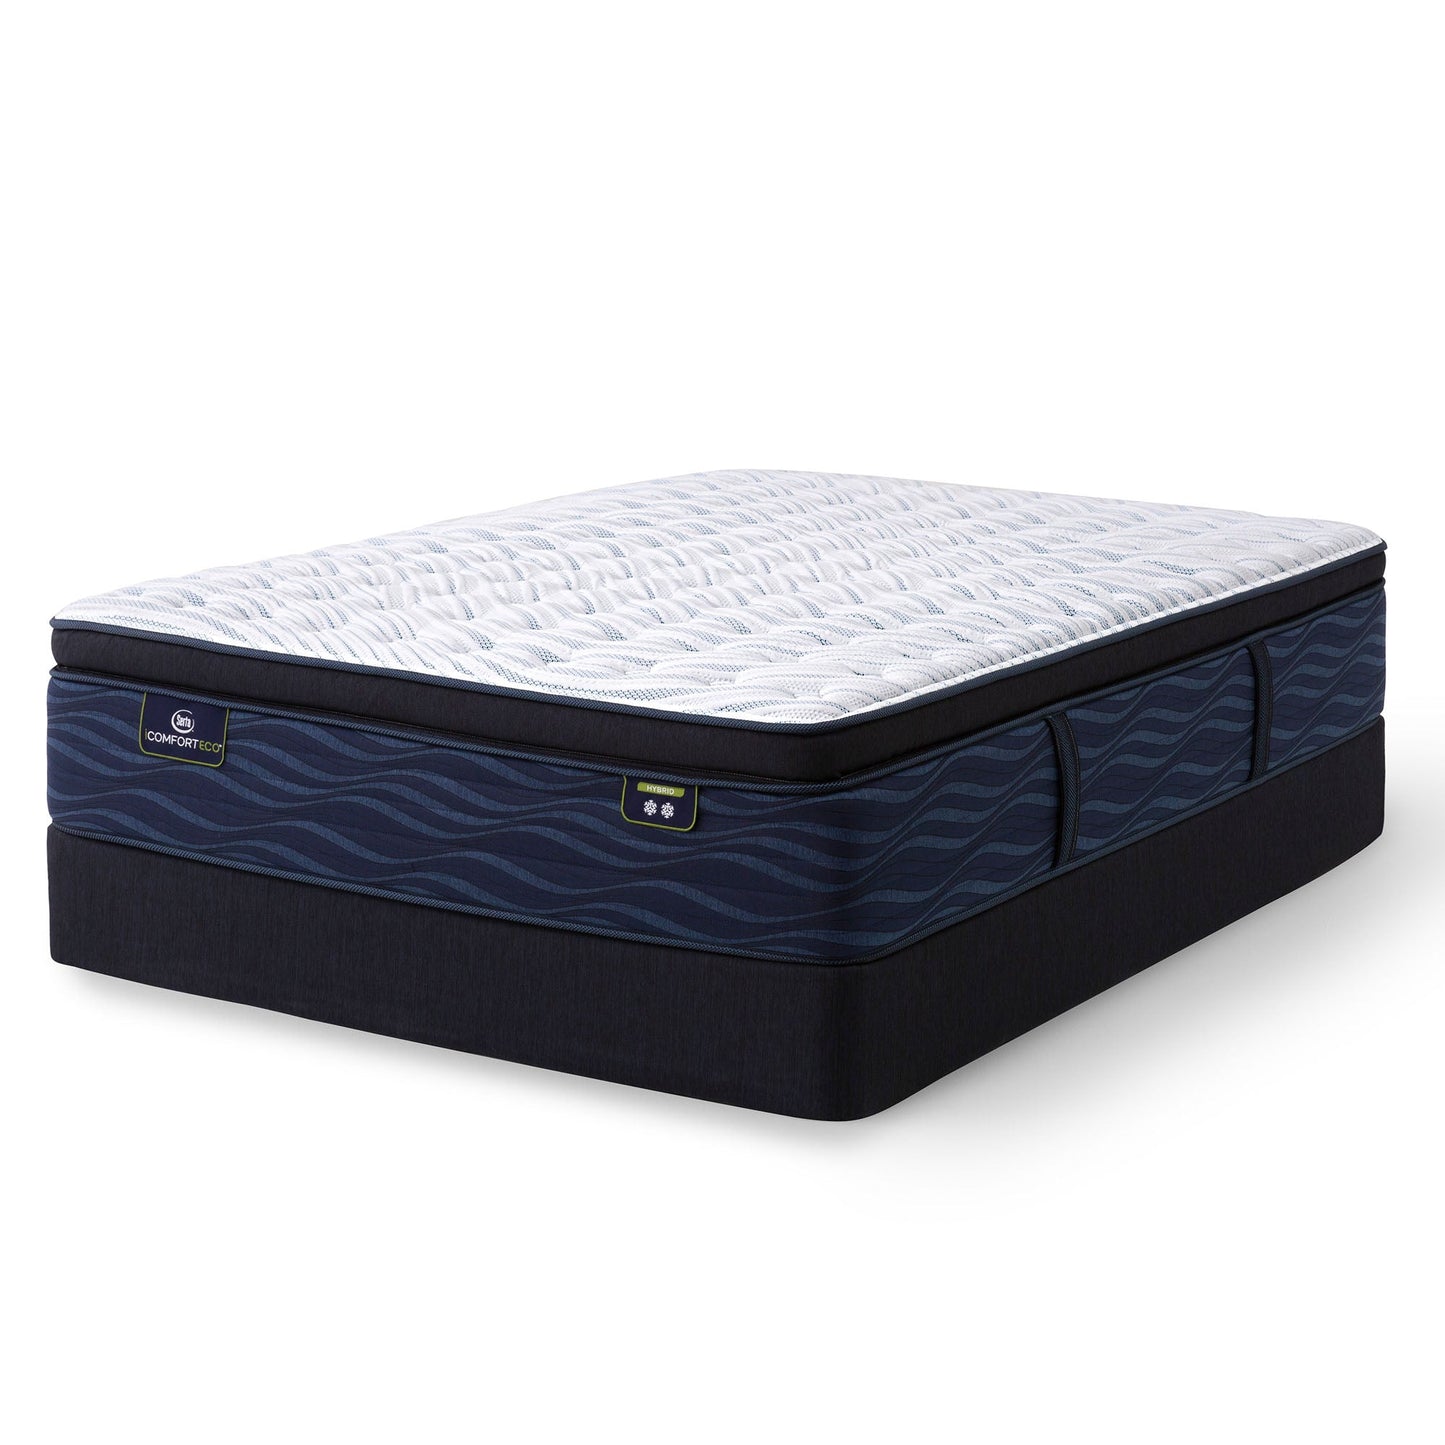 Serta iComfortECO Quilted Hybrid Firm Pillow Top Mattress On Standard Box Spring